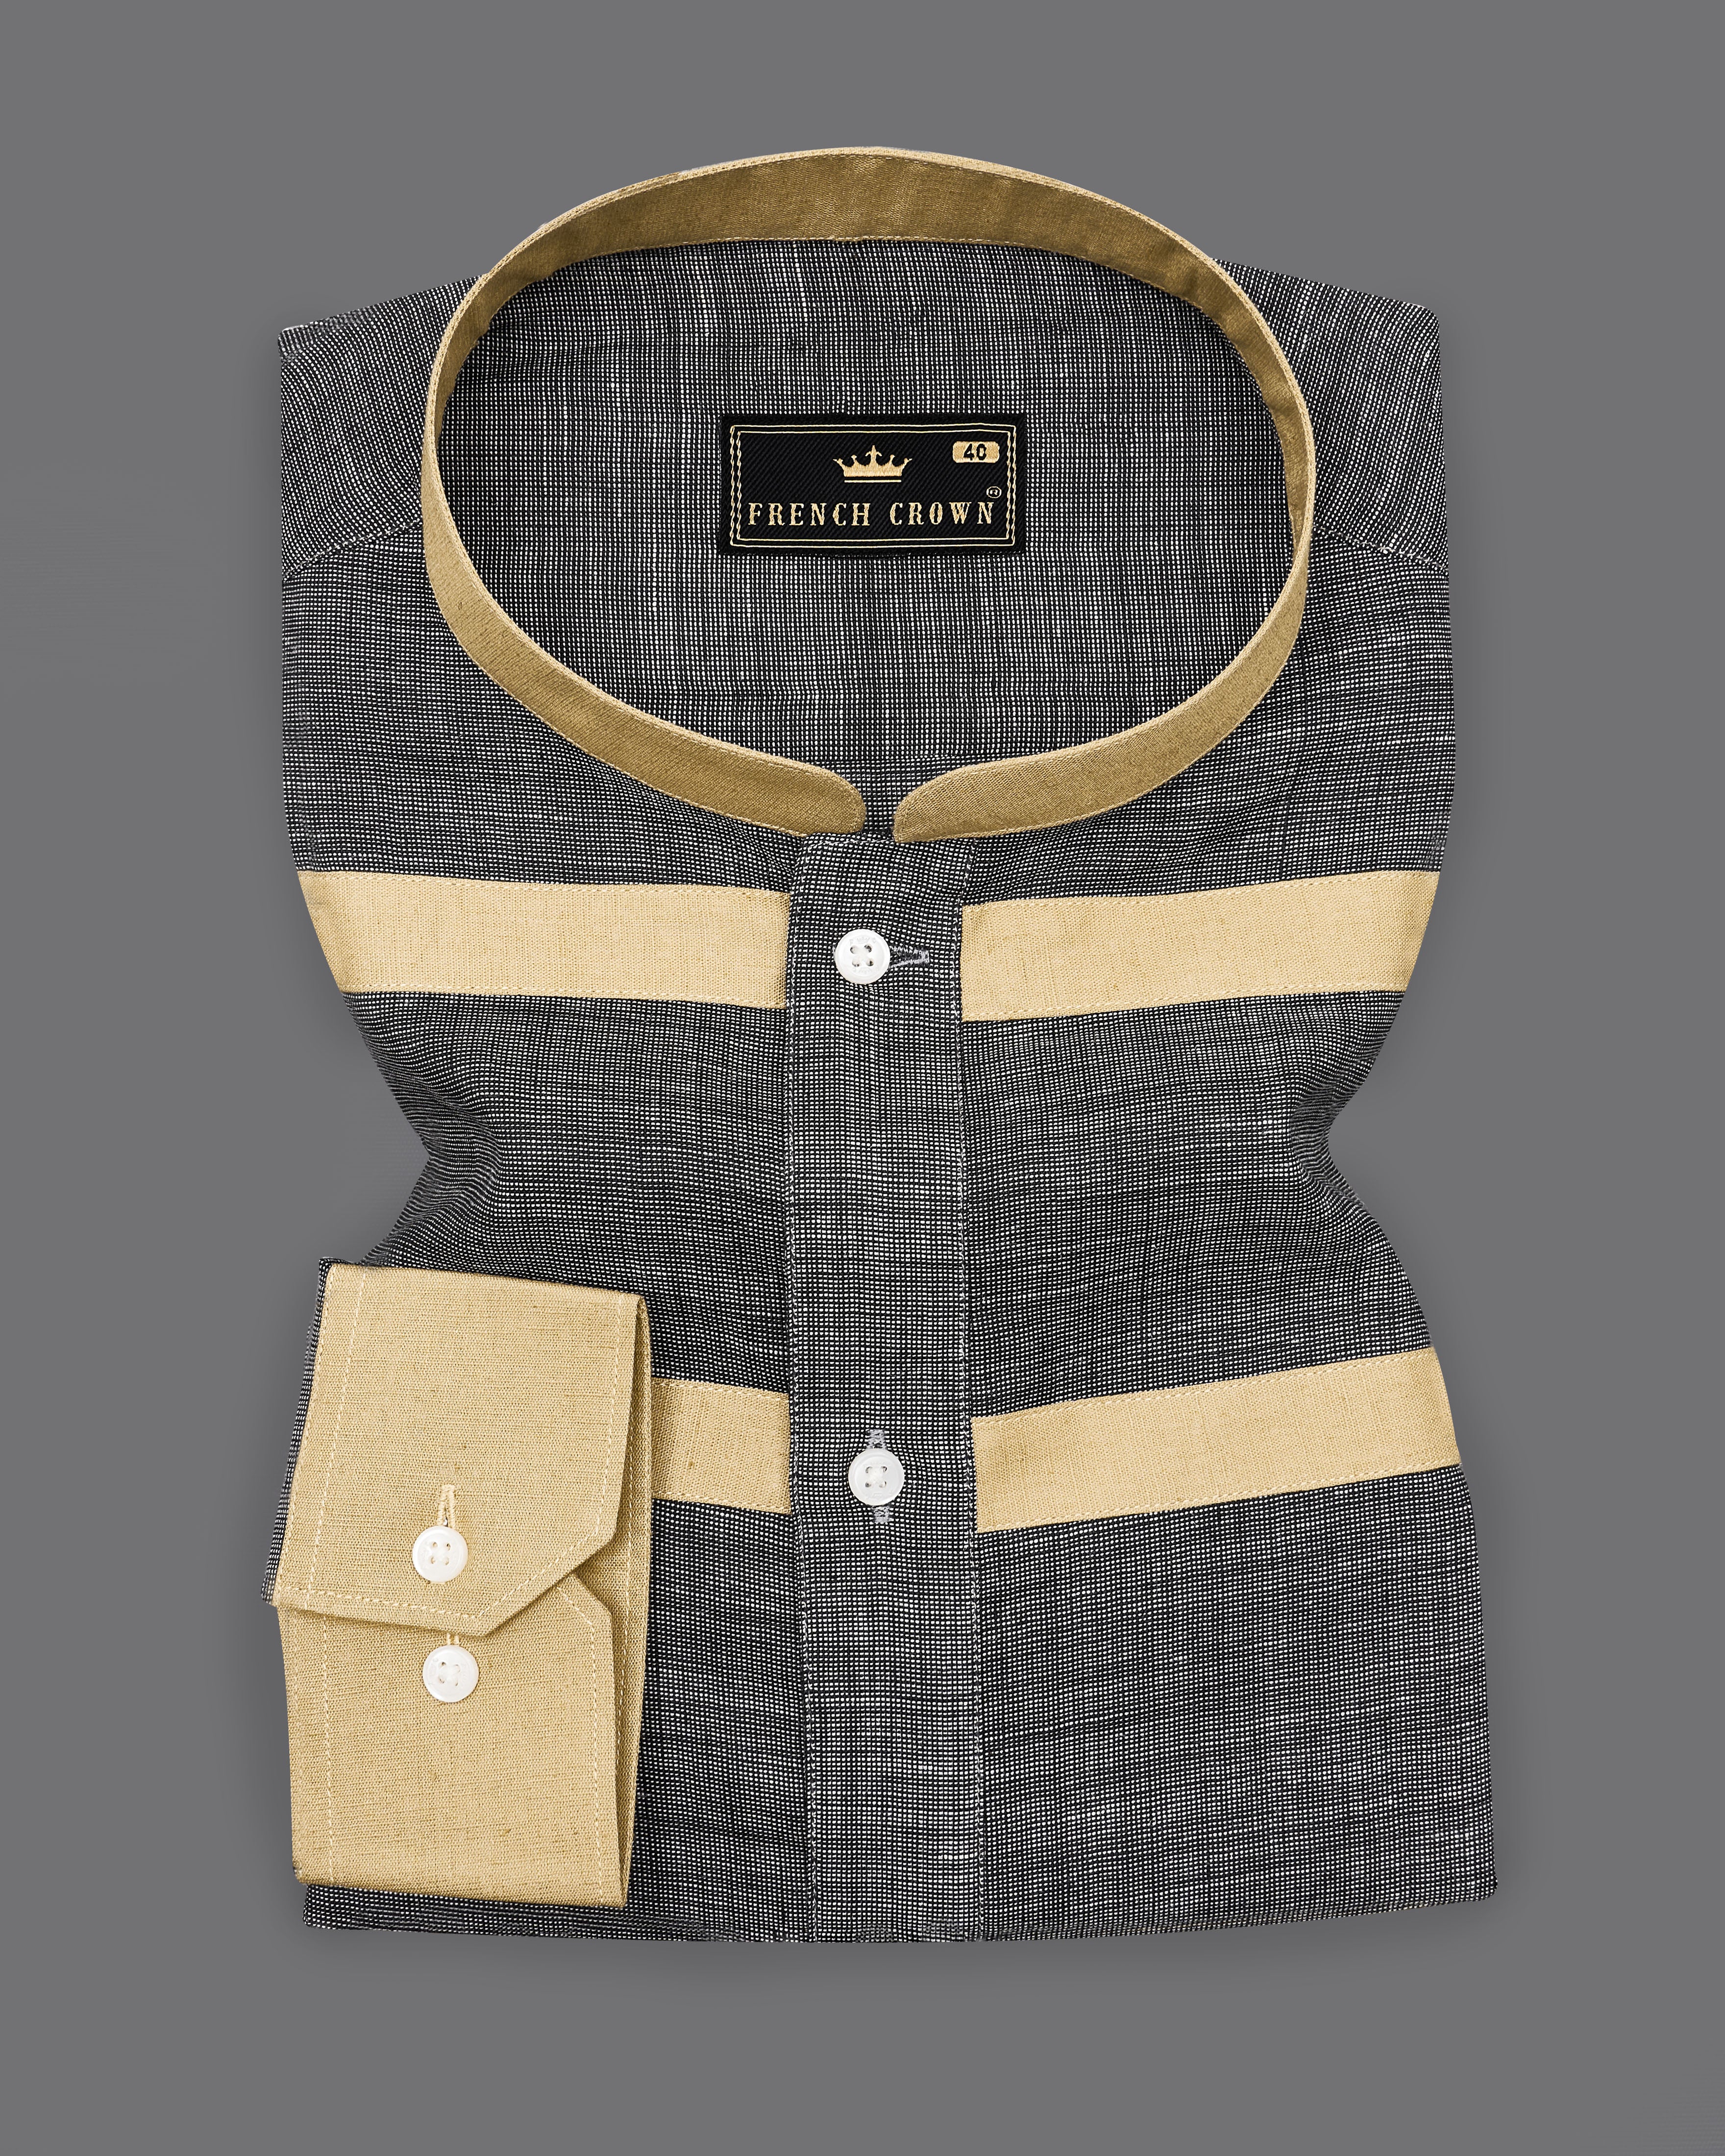 Wenge Gray with Patchwork Luxurious Linen Designer Shirt 9129-P380-38,9129-P380-H-38,9129-P380-39,9129-P380-H-39,9129-P380-40,9129-P380-H-40,9129-P380-42,9129-P380-H-42,9129-P380-44,9129-P380-H-44,9129-P380-46,9129-P380-H-46,9129-P380-48,9129-P380-H-48,9129-P380-50,9129-P380-H-50,9129-P380-52,9129-P380-H-52